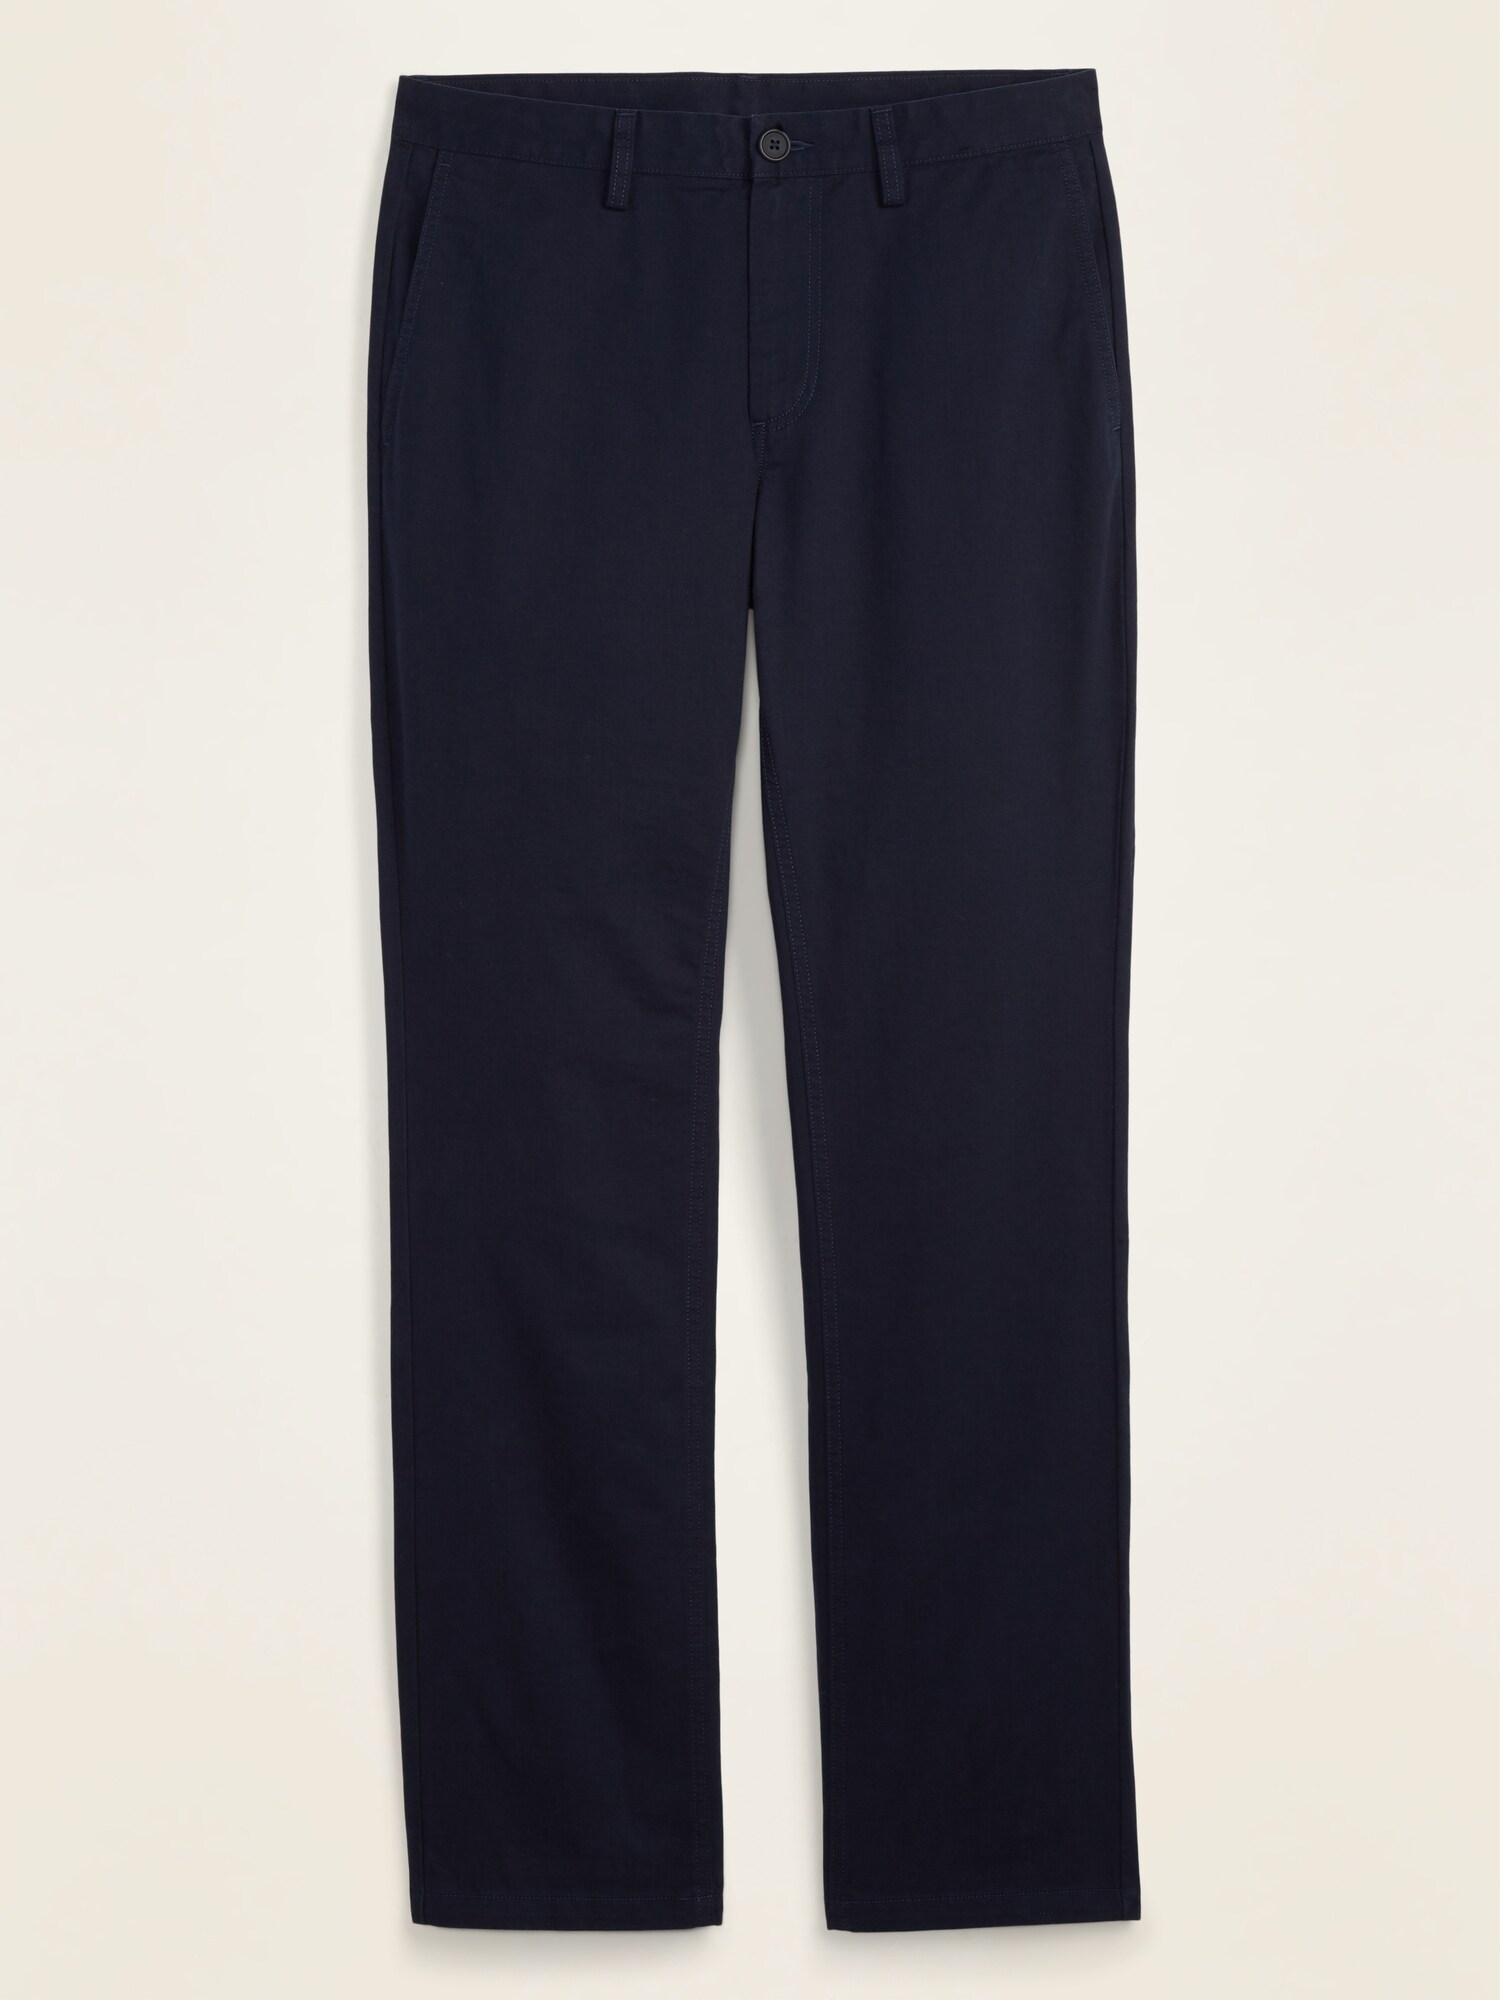 Straight Uniform Non-Stretch Chino Pants for Men | Old Navy